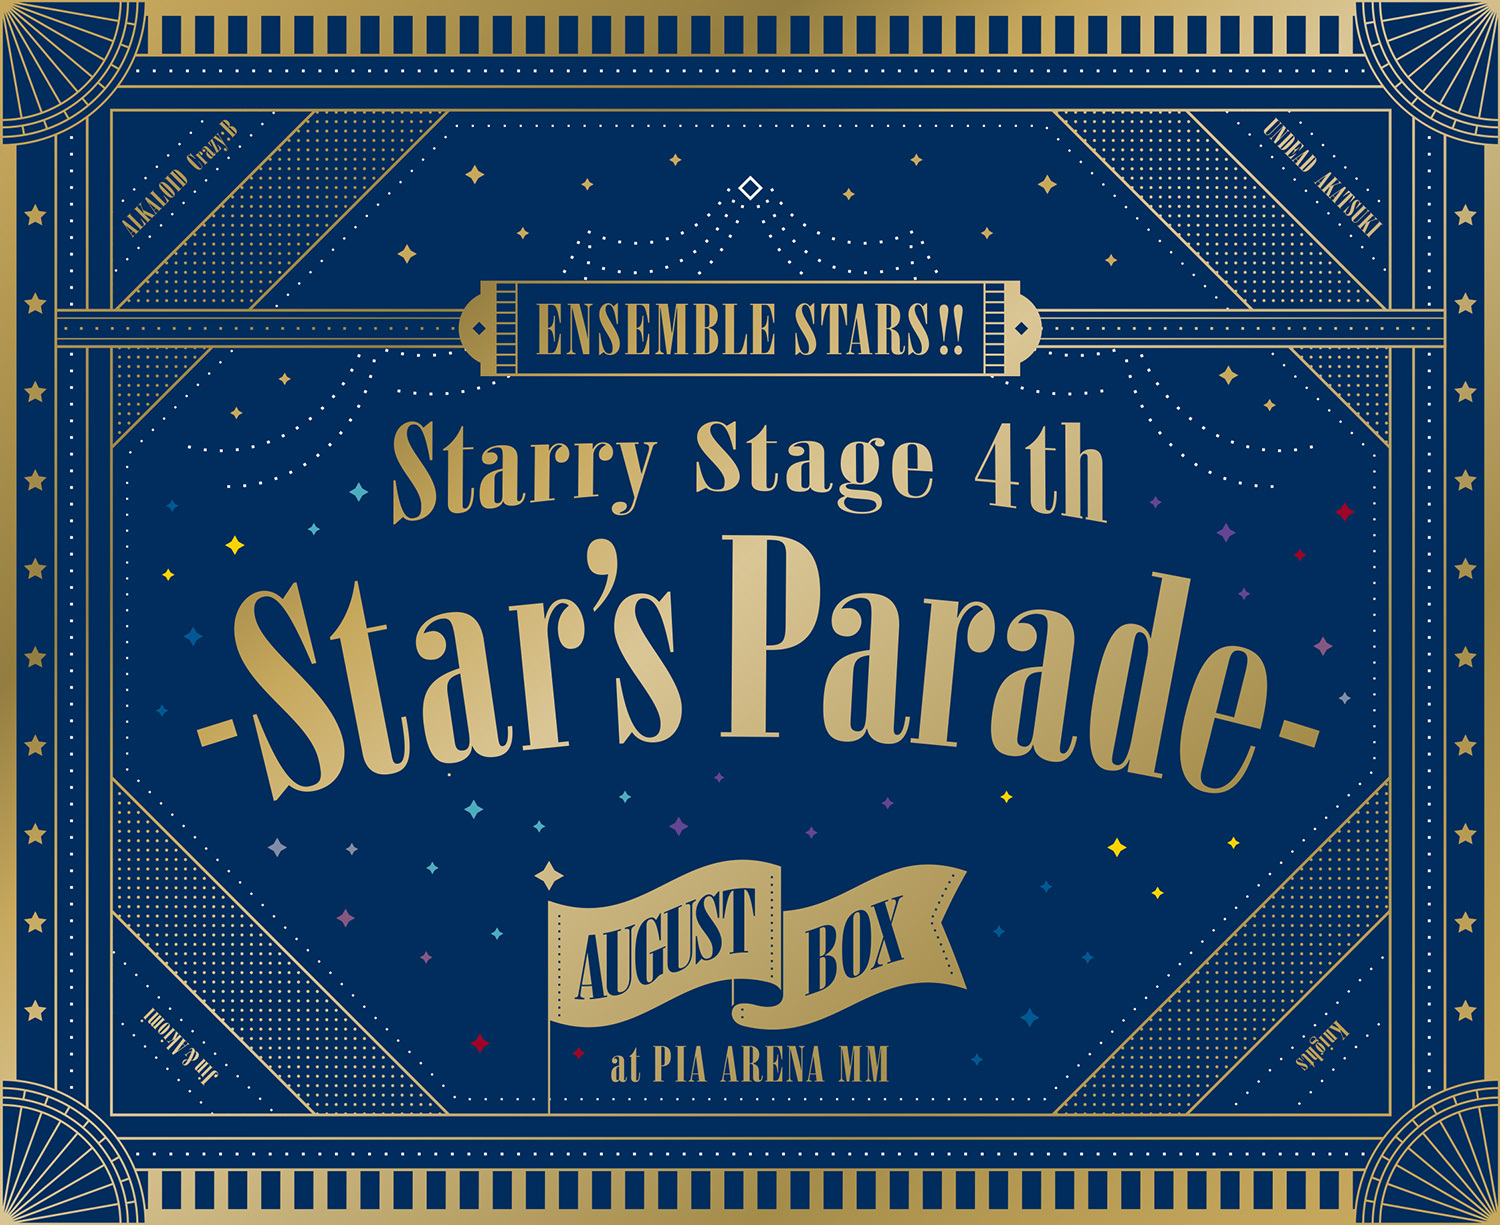 Starry Stage スタステ 4th August Blu-ray BOX